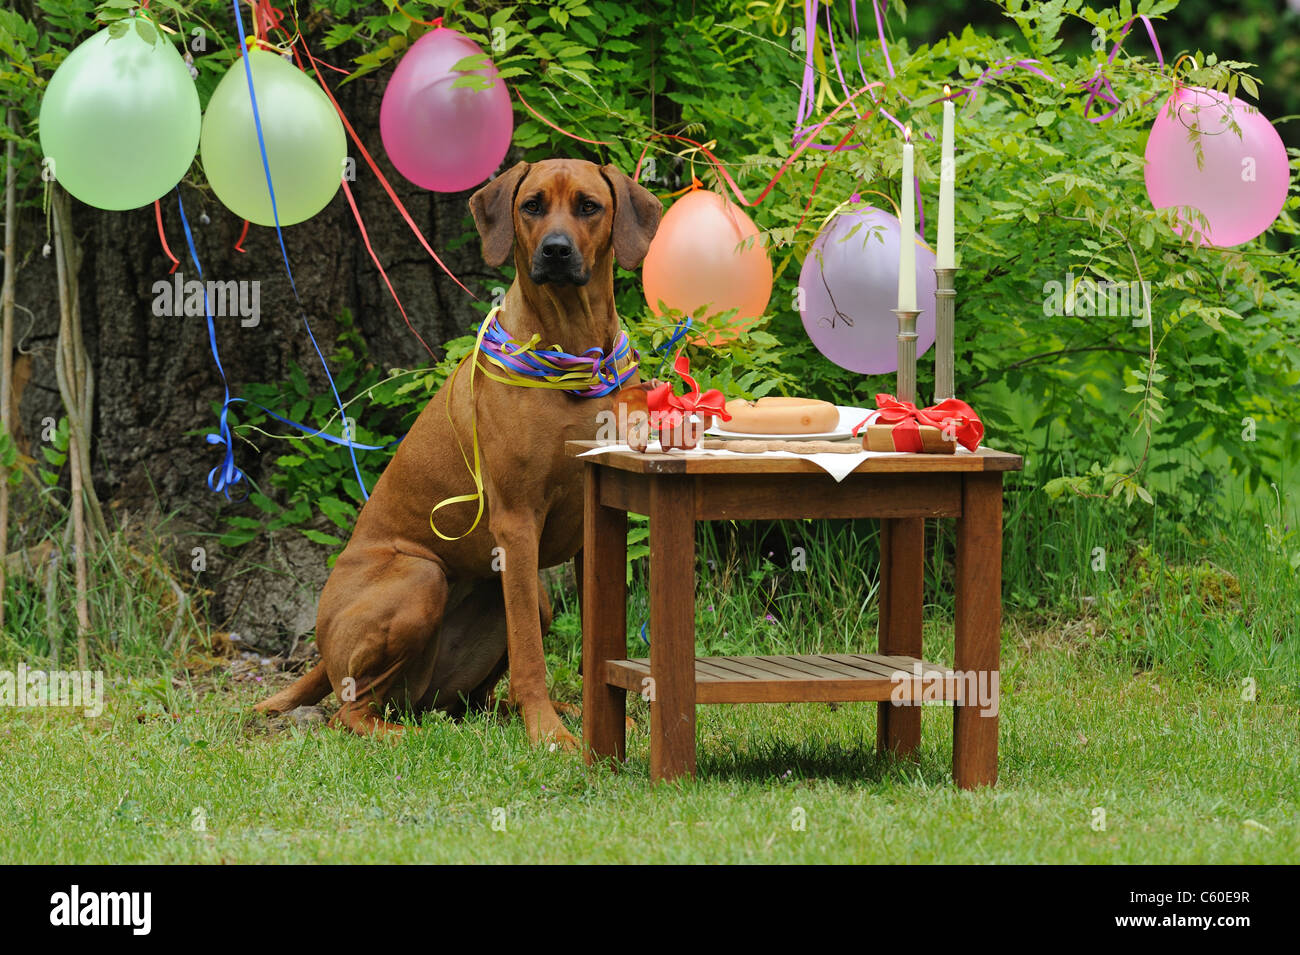 Rhodesian Ridgeback. Bitch sitting in front of a table with a birthday cake in a garden decorated with balloons and paper snakes Stock Photo